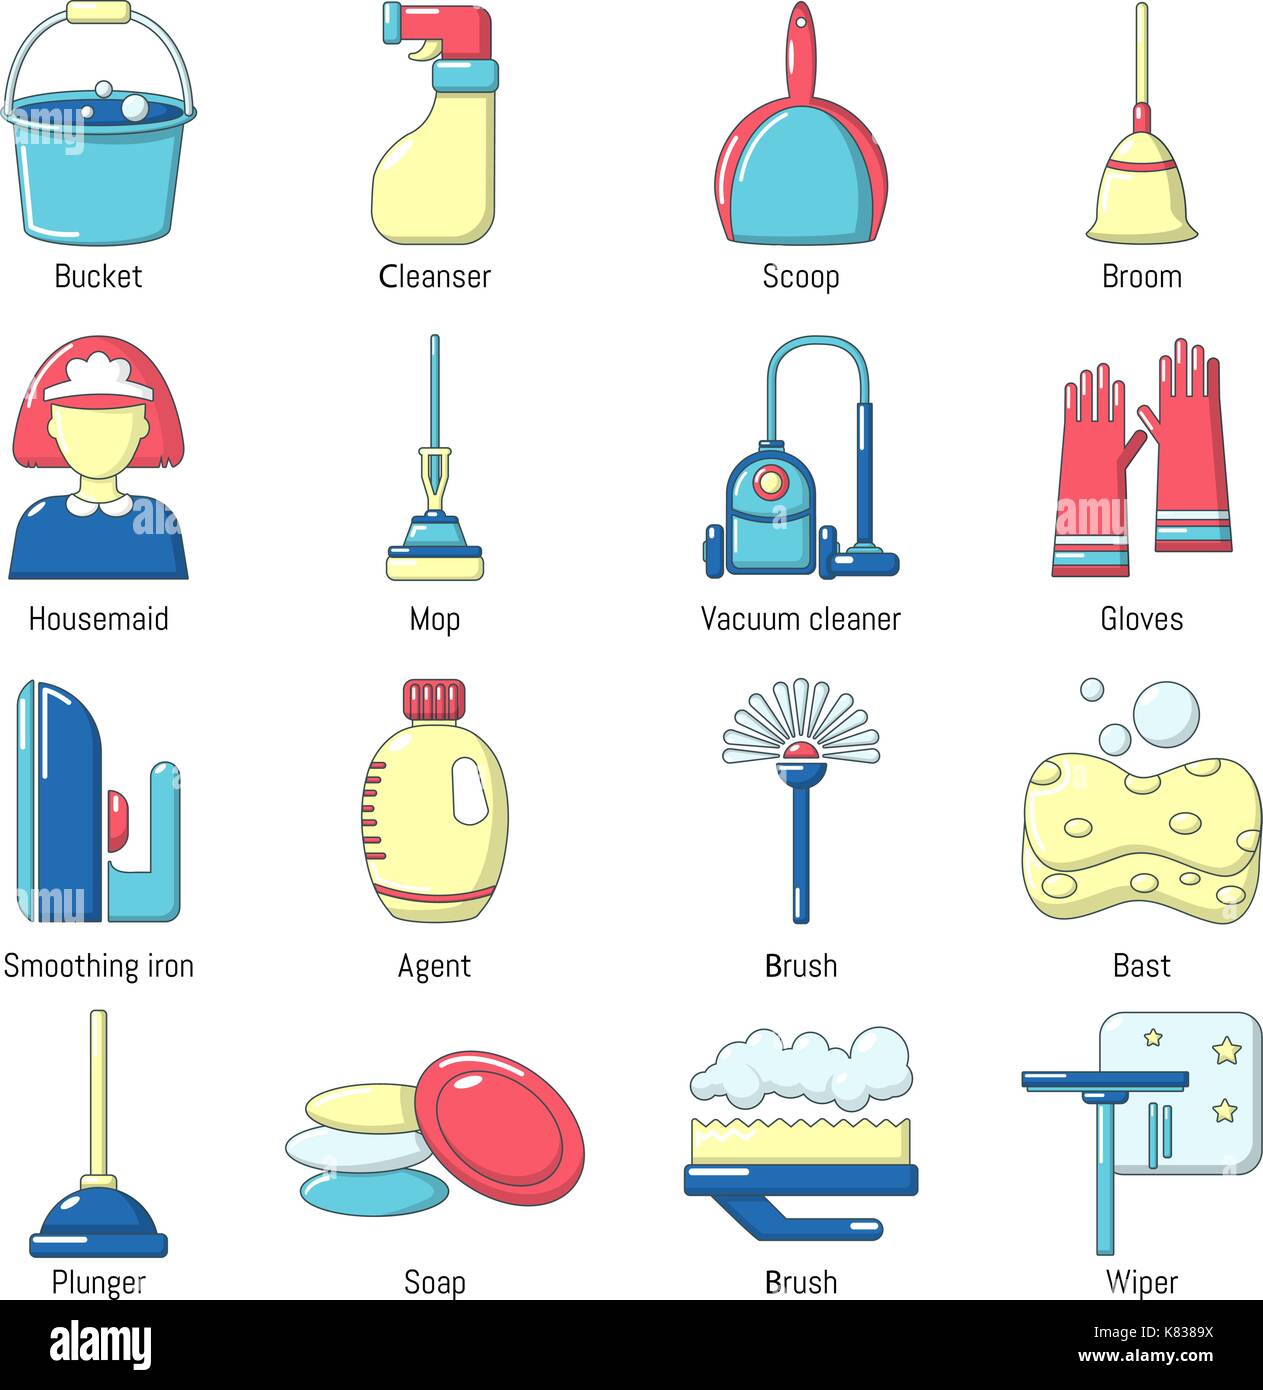 Janitorial Products Birminghamg